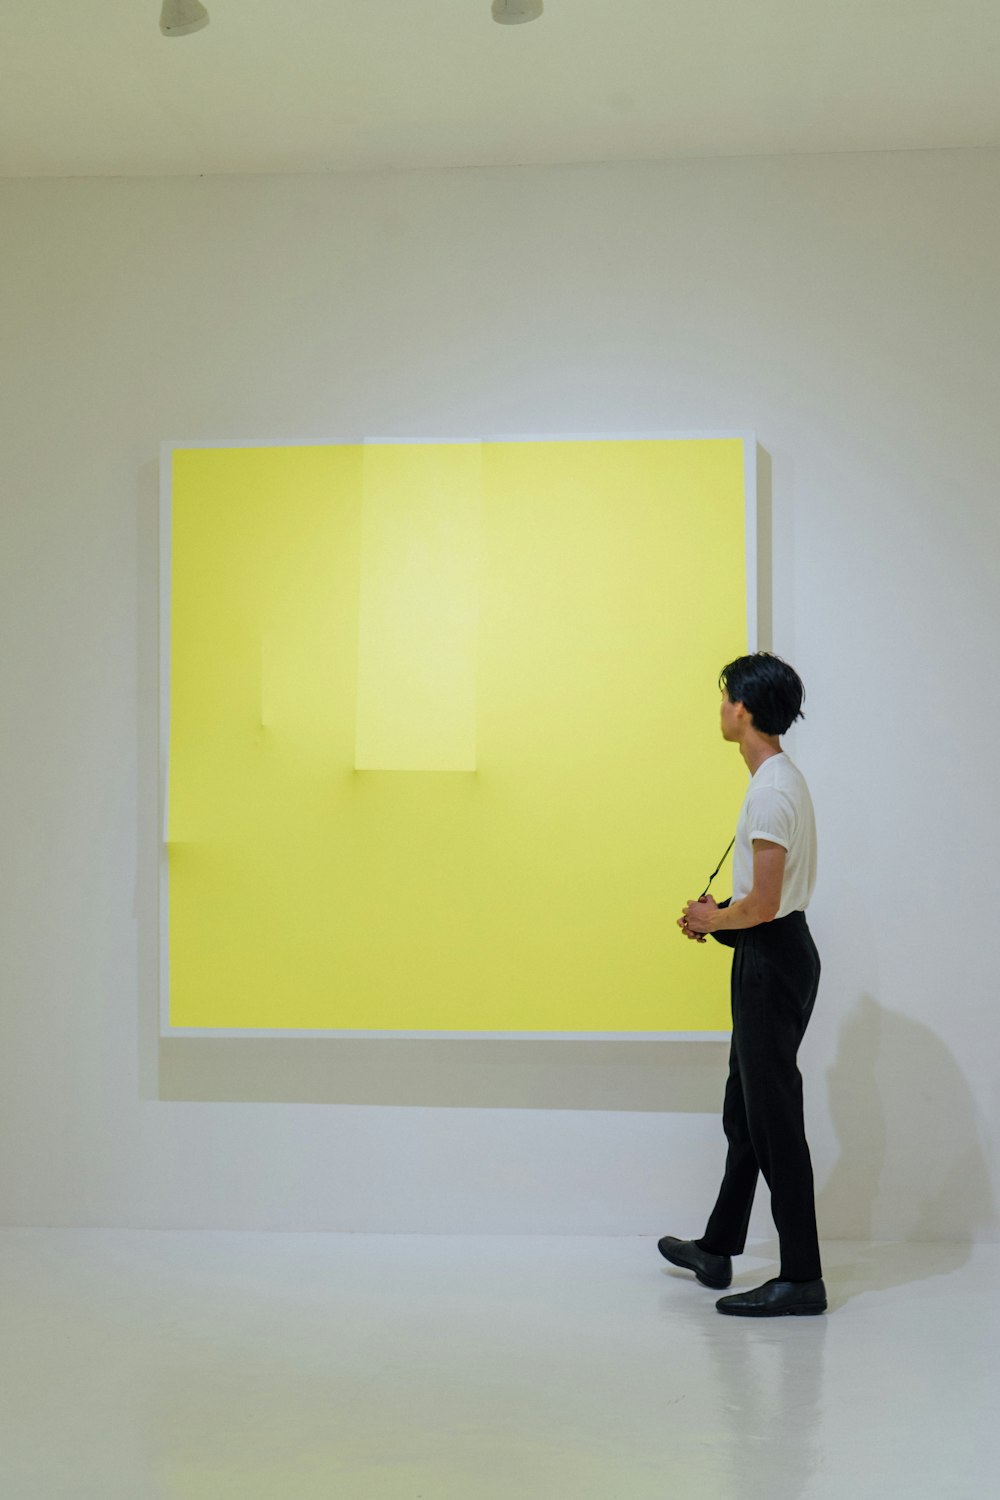 a person standing in front of a yellow painting